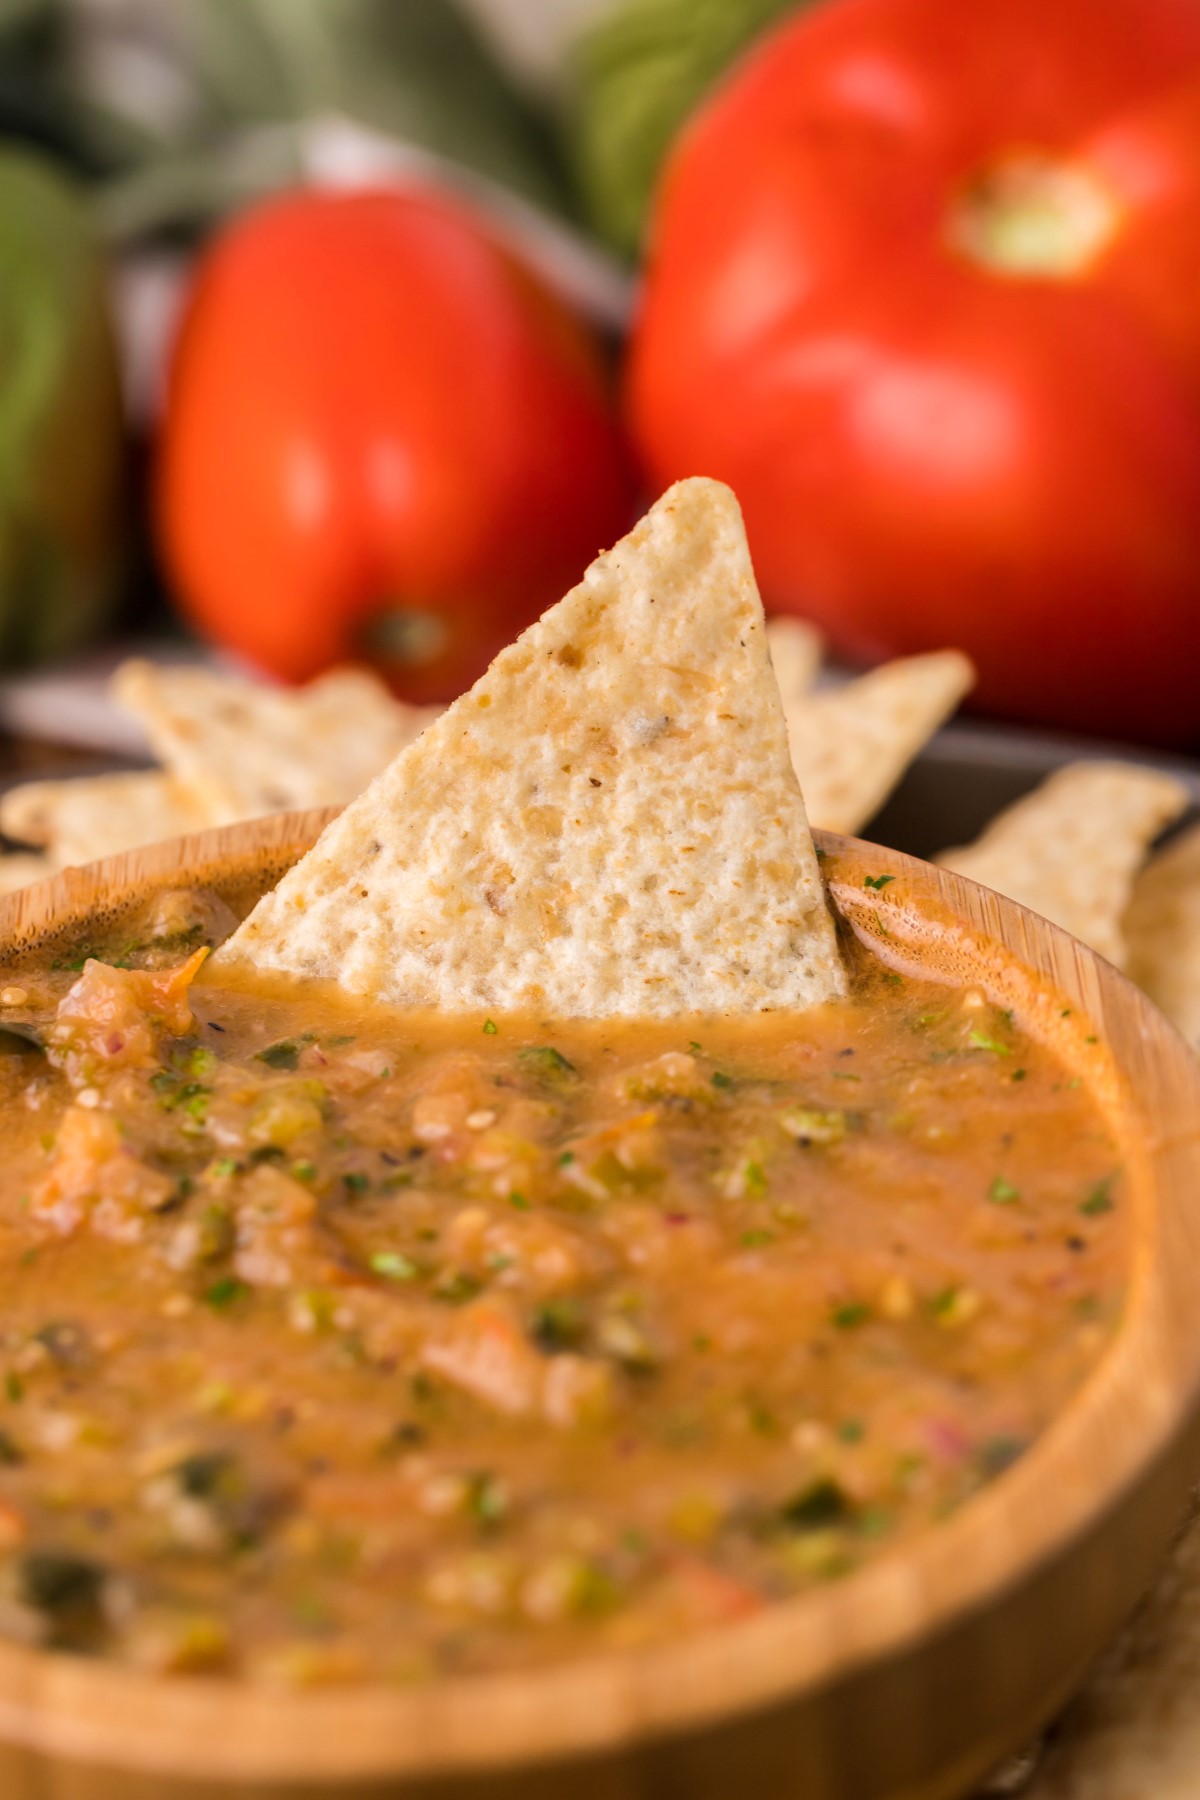 Smoked salsa in a wooden bowl with a tortilla chip dipped into the salsa